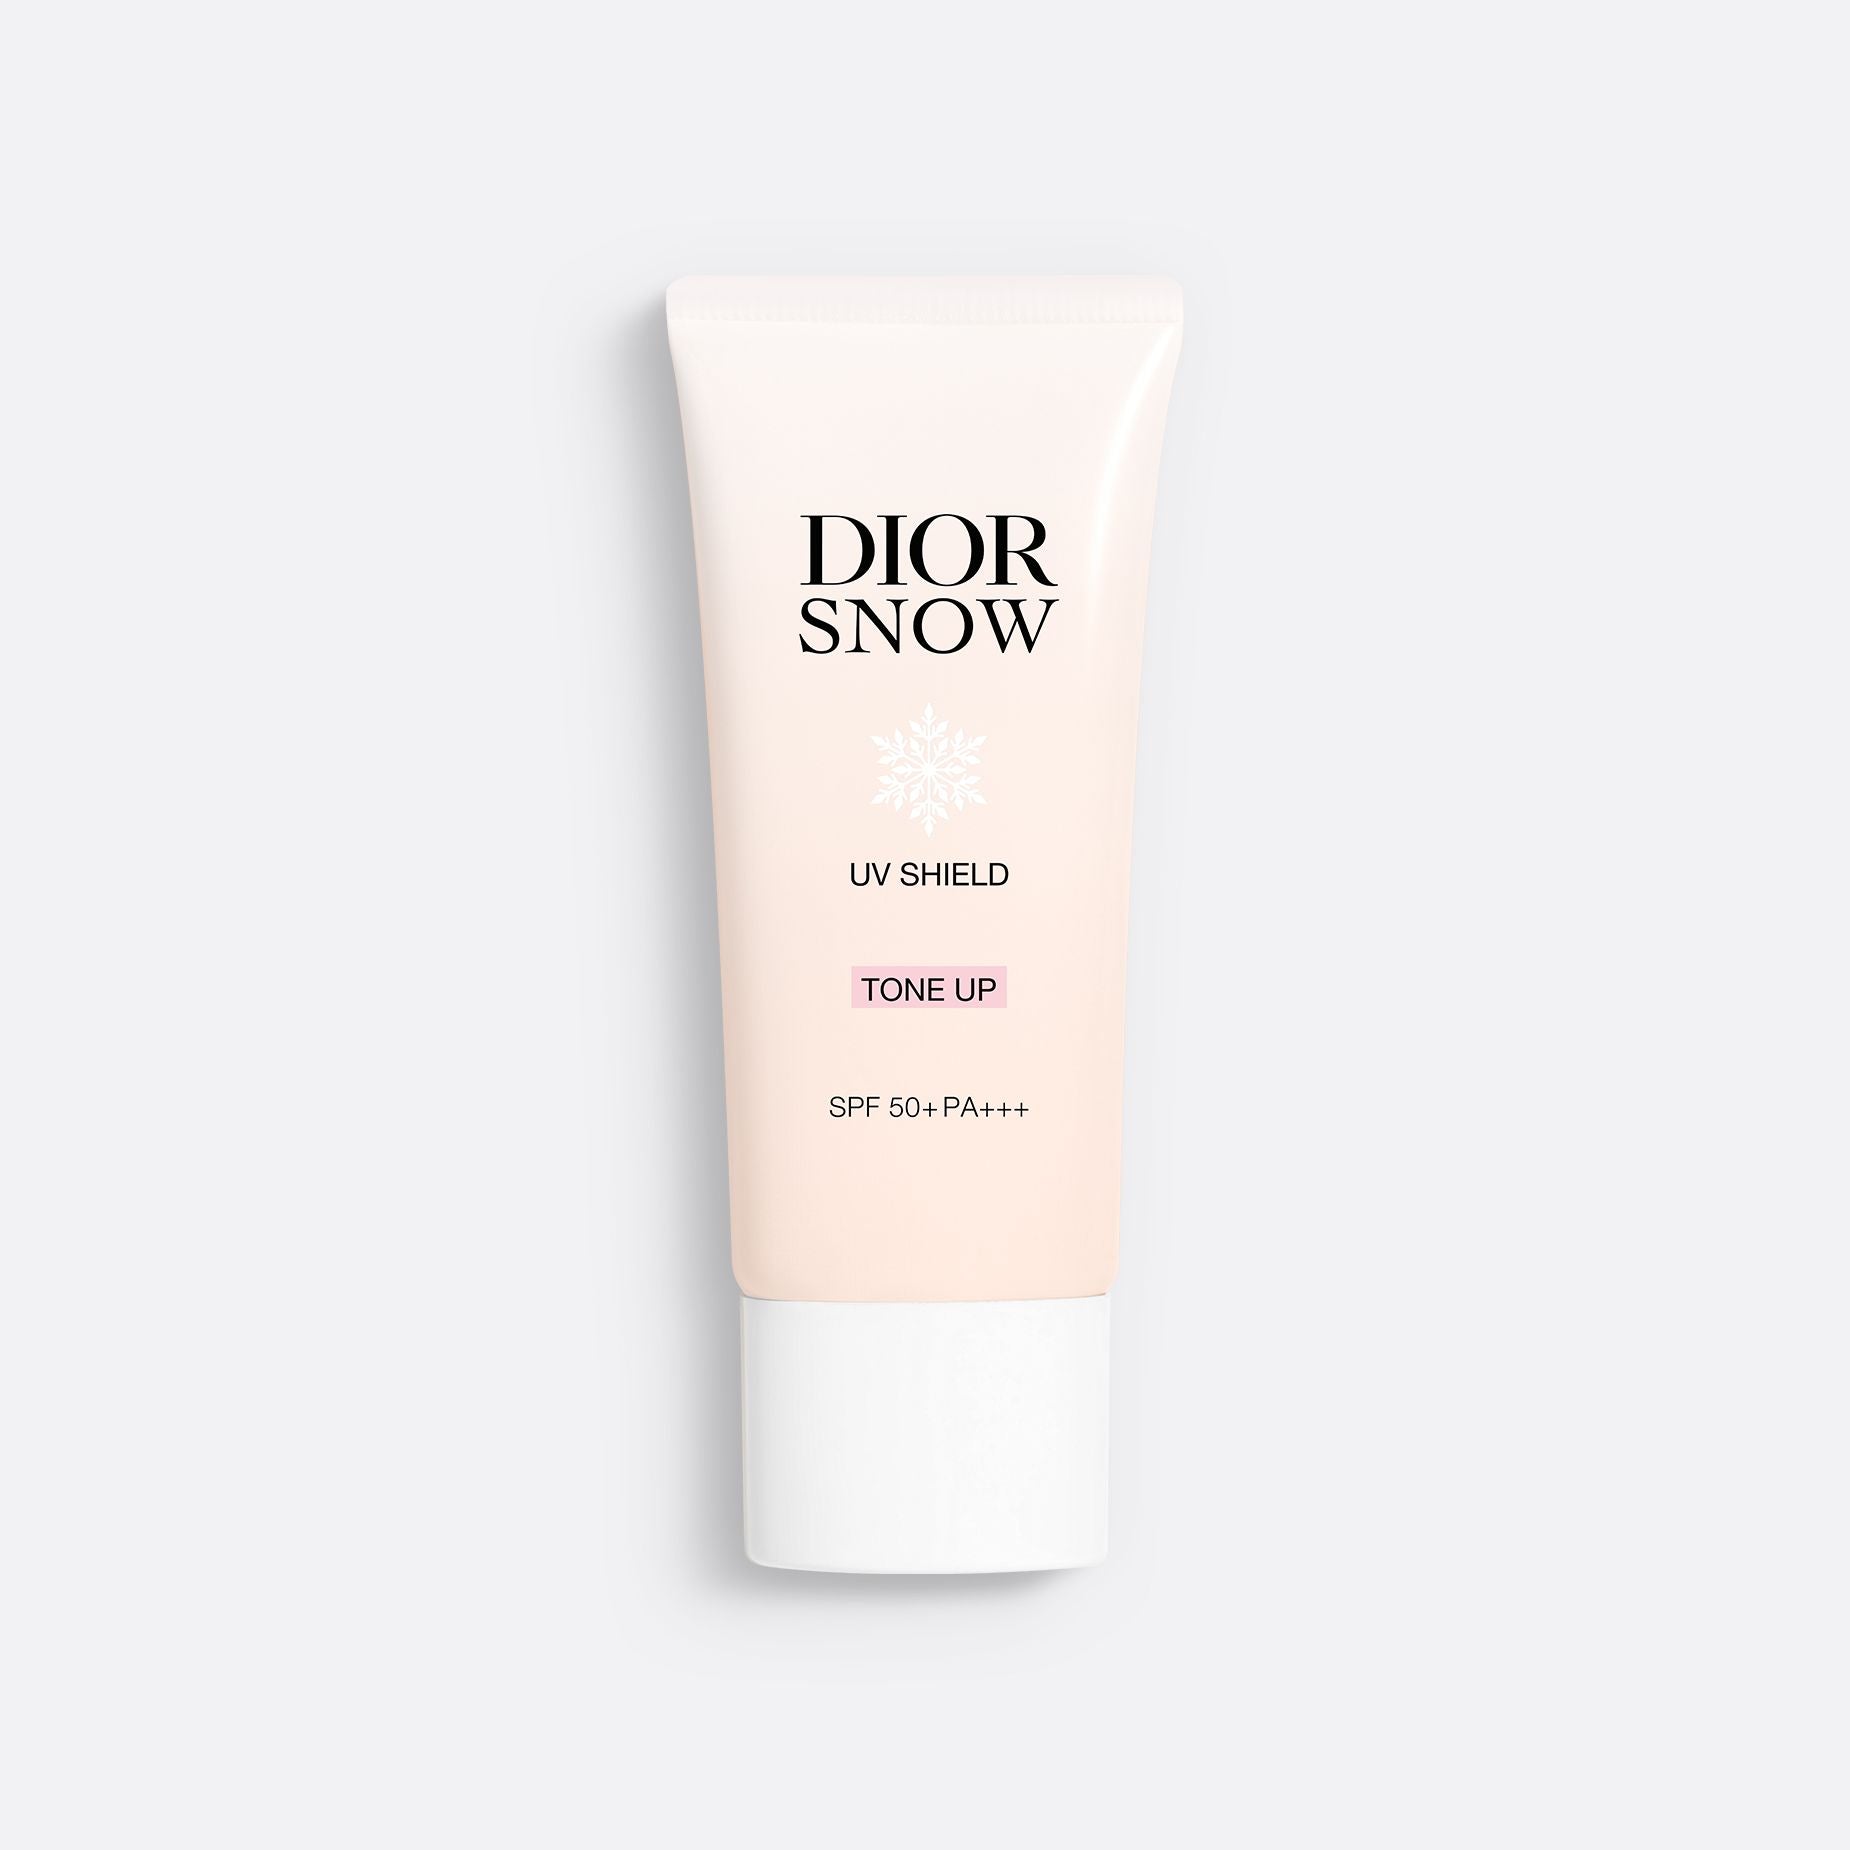 DIORSNOW UV SHIELD TONE UP ~ UV Protection for Face - Tinted Skincare - SPF 50+ PA+++